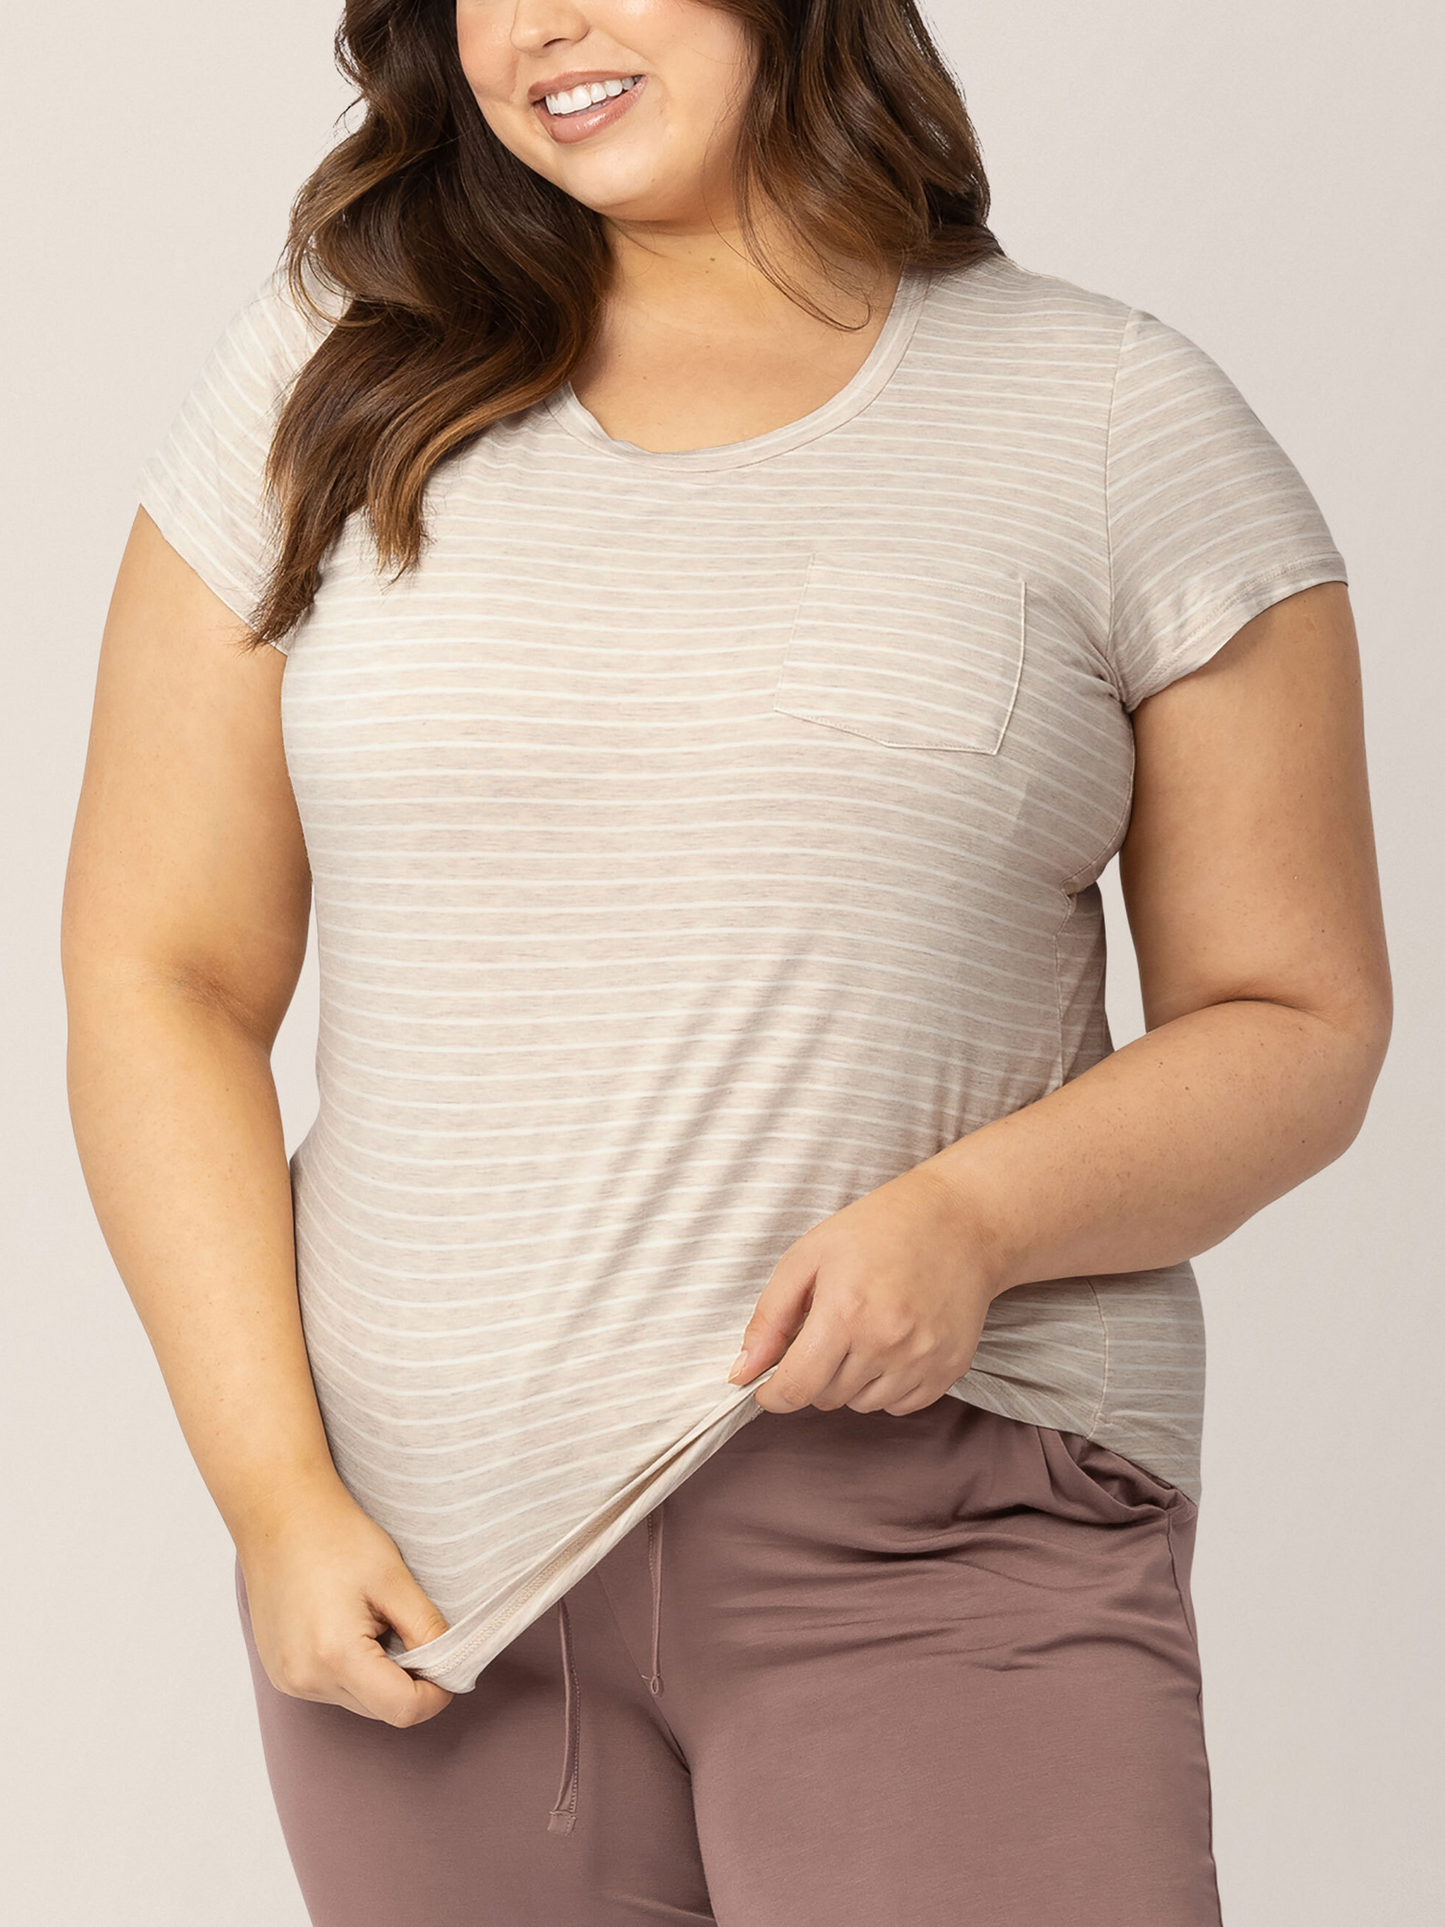 Closeup of a model wearing the Everyday Maternity & Nursing T-shirt in Oatmeal Stripe